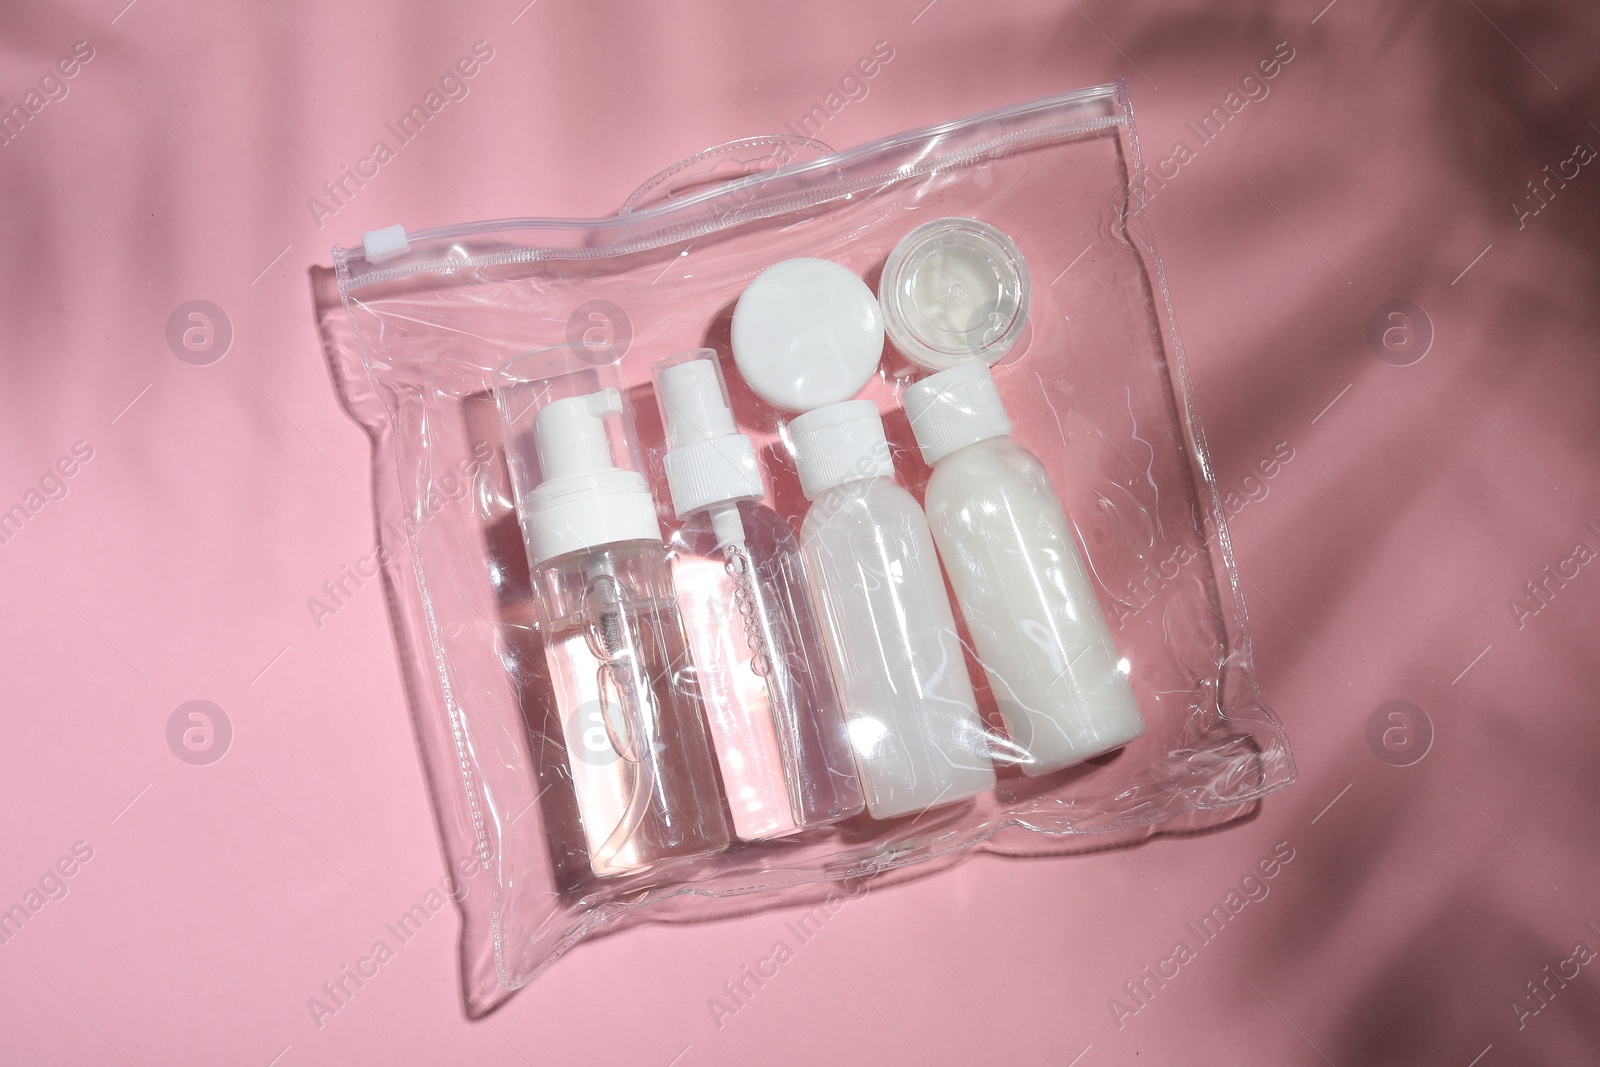 Photo of Cosmetic travel kit in plastic bag on pink background, top view. Bath accessories